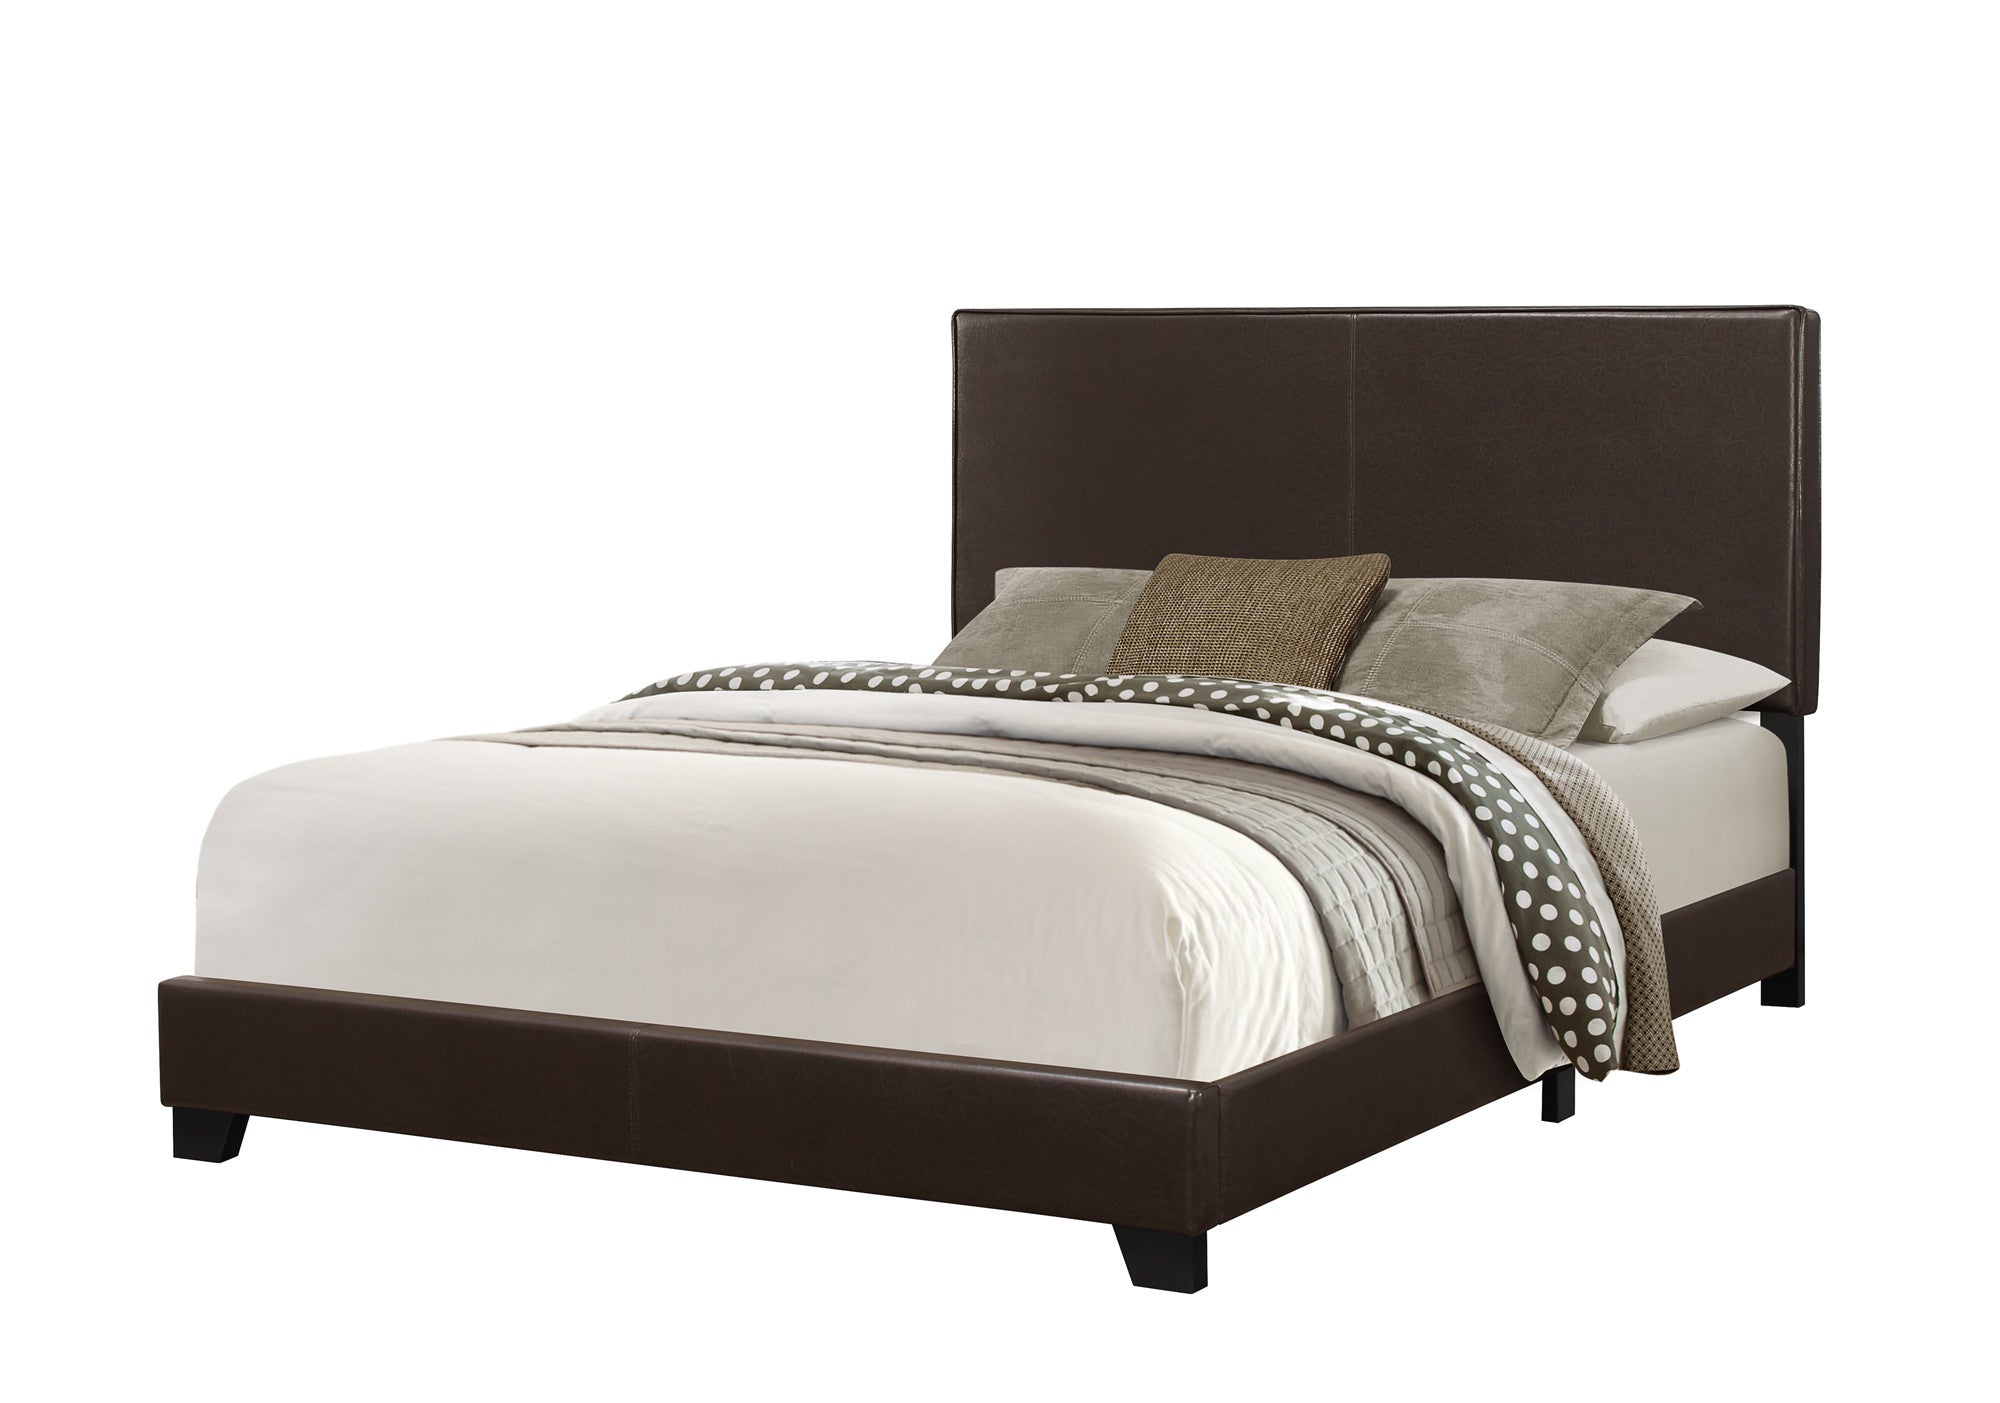 45.75" Solid Wood MDF and Foam Queen Size Bed with Leather Look